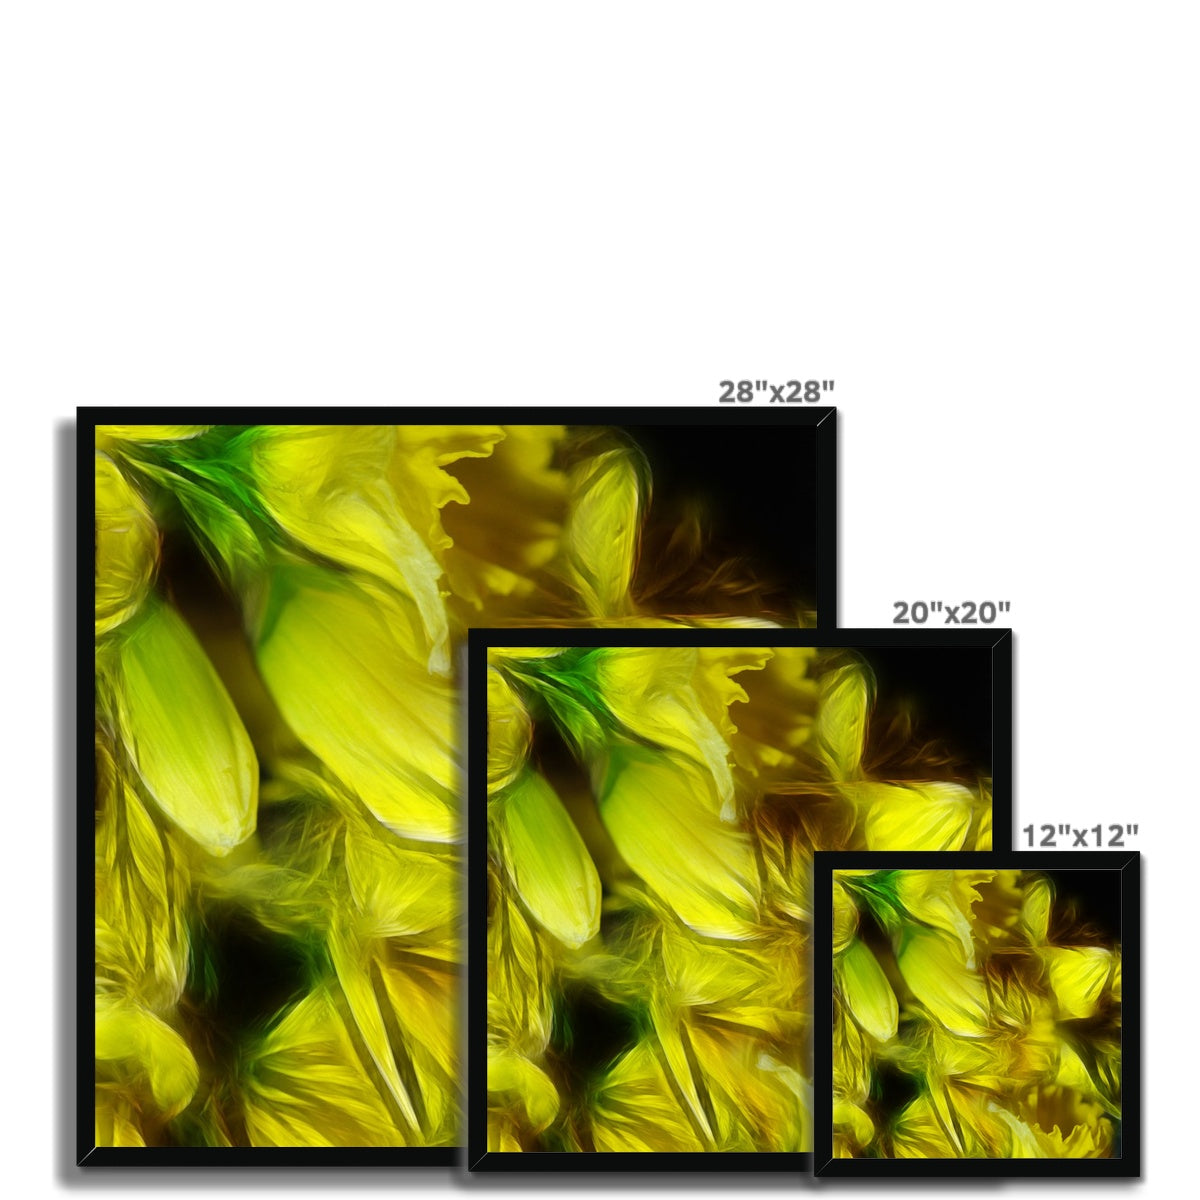 Abstract Yellow Daffodils Framed Print